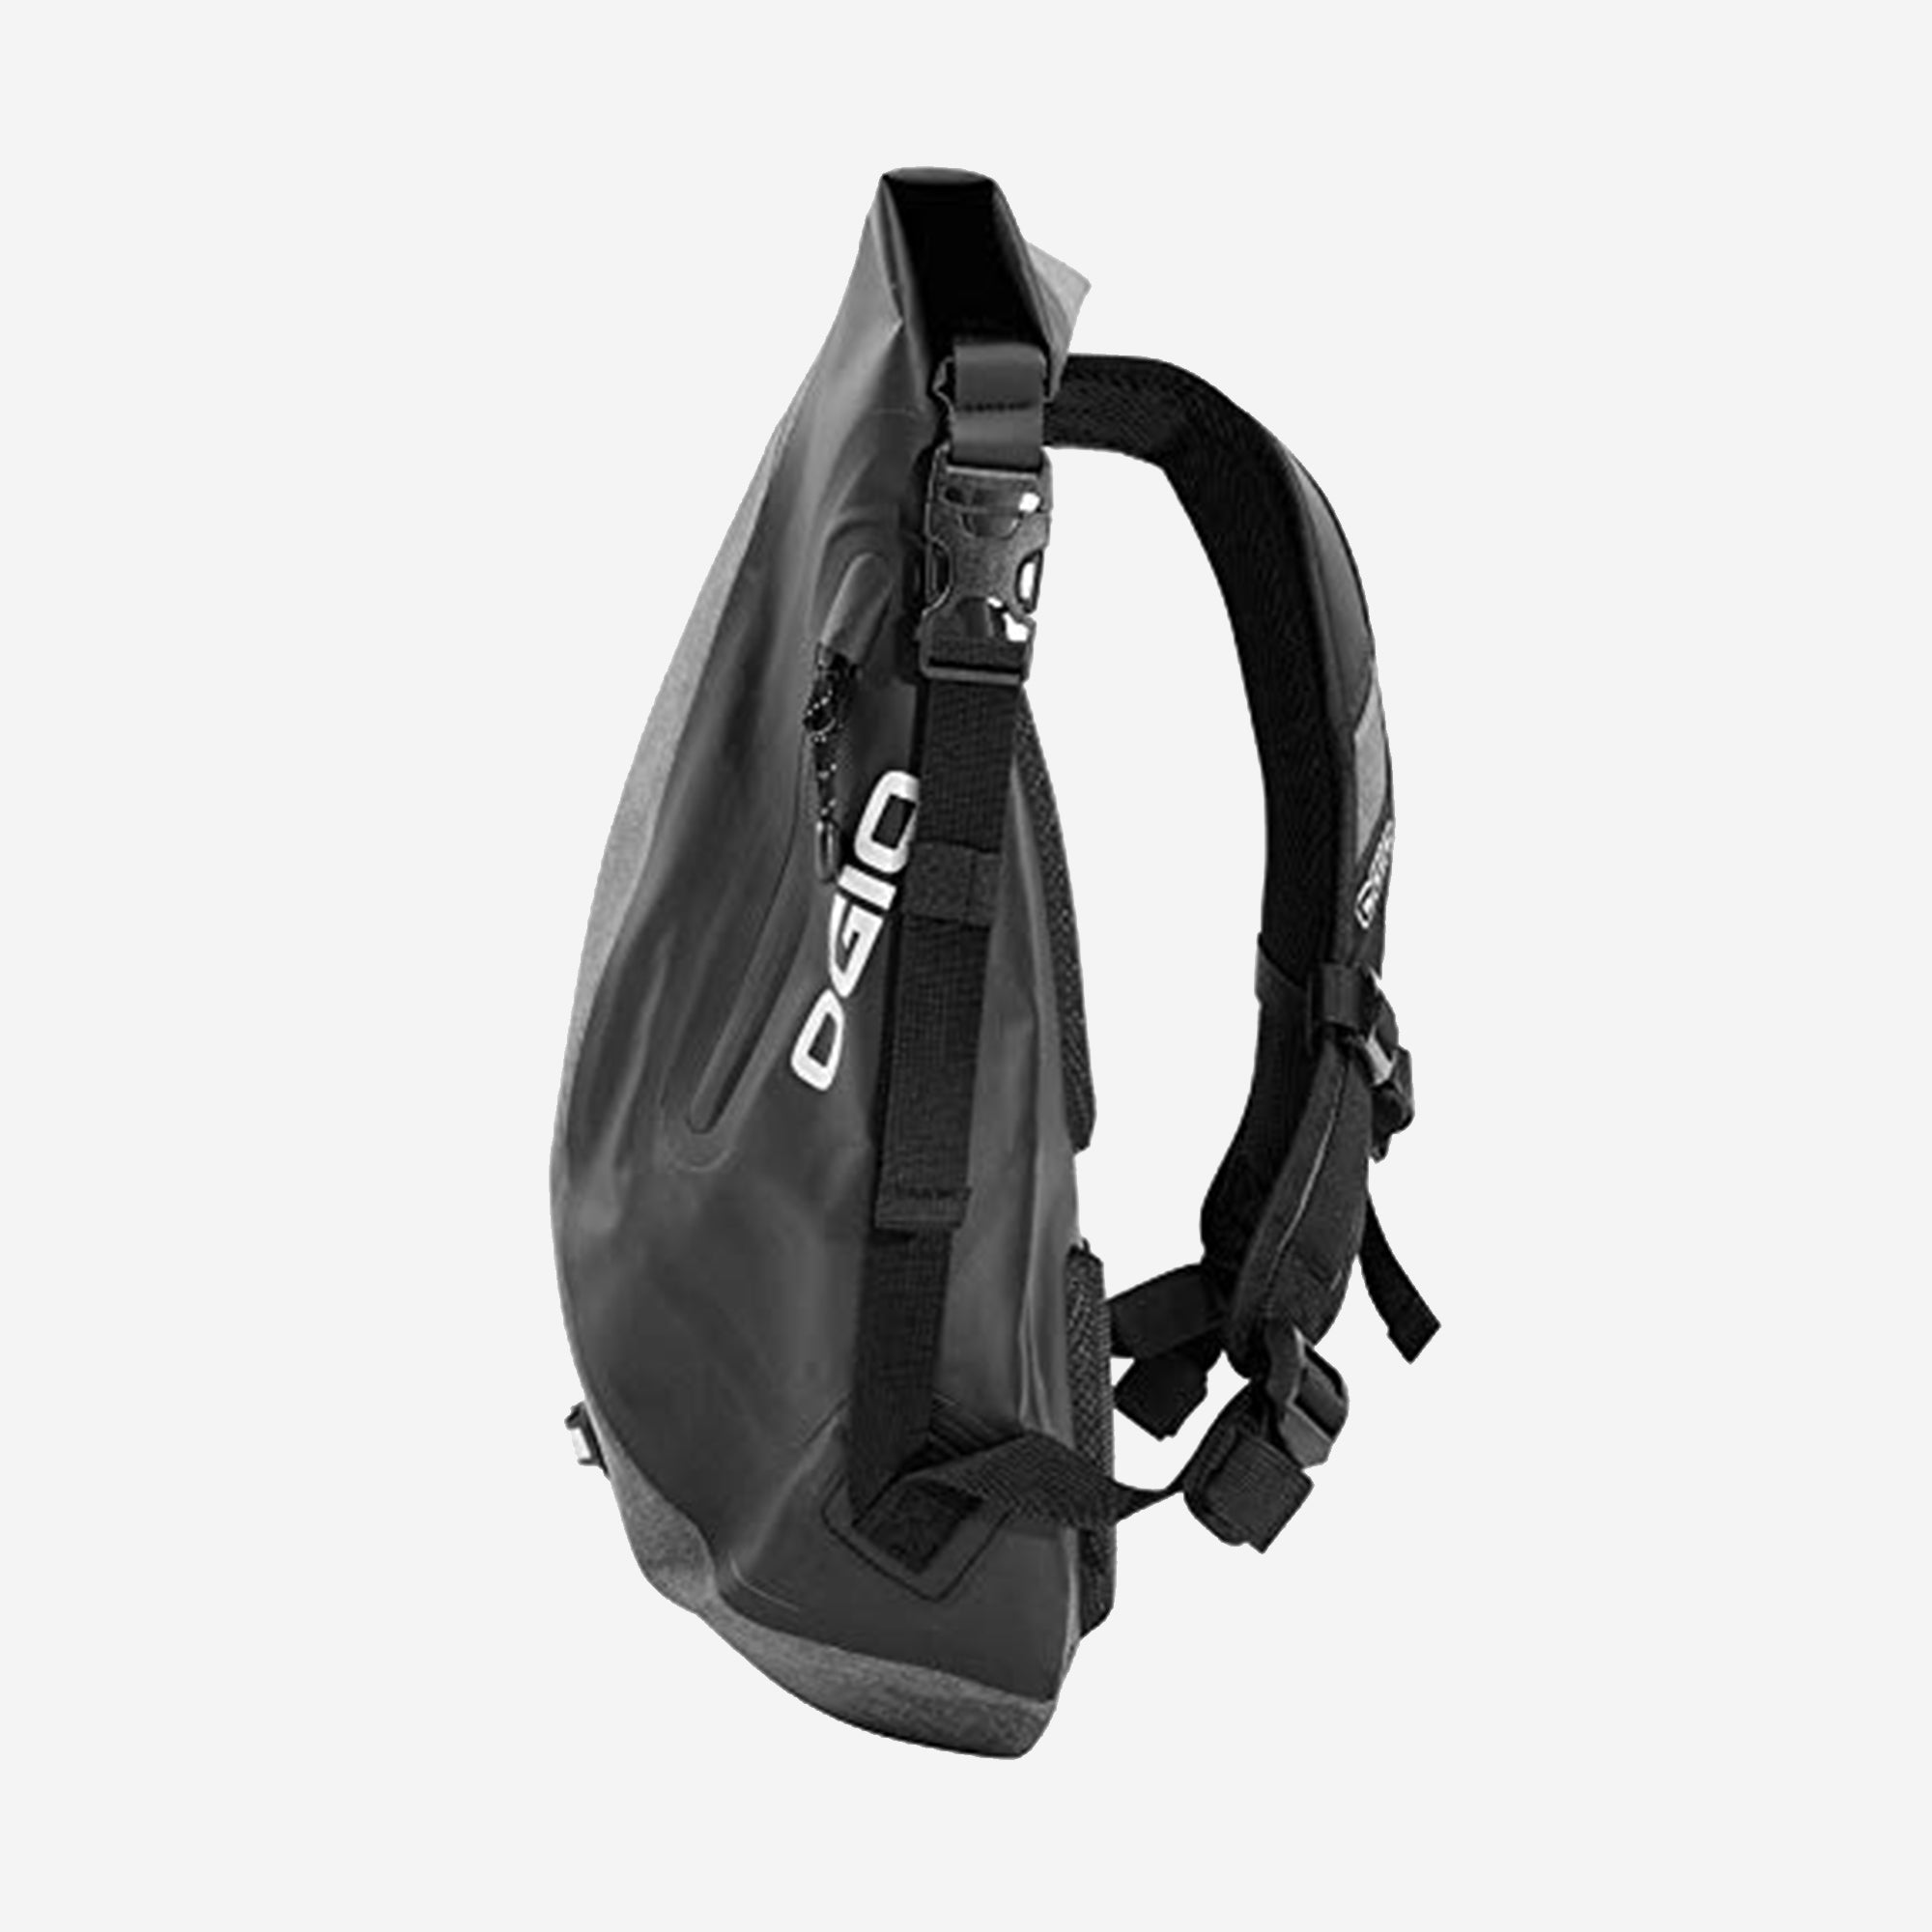 All Elements Aero D Backpack